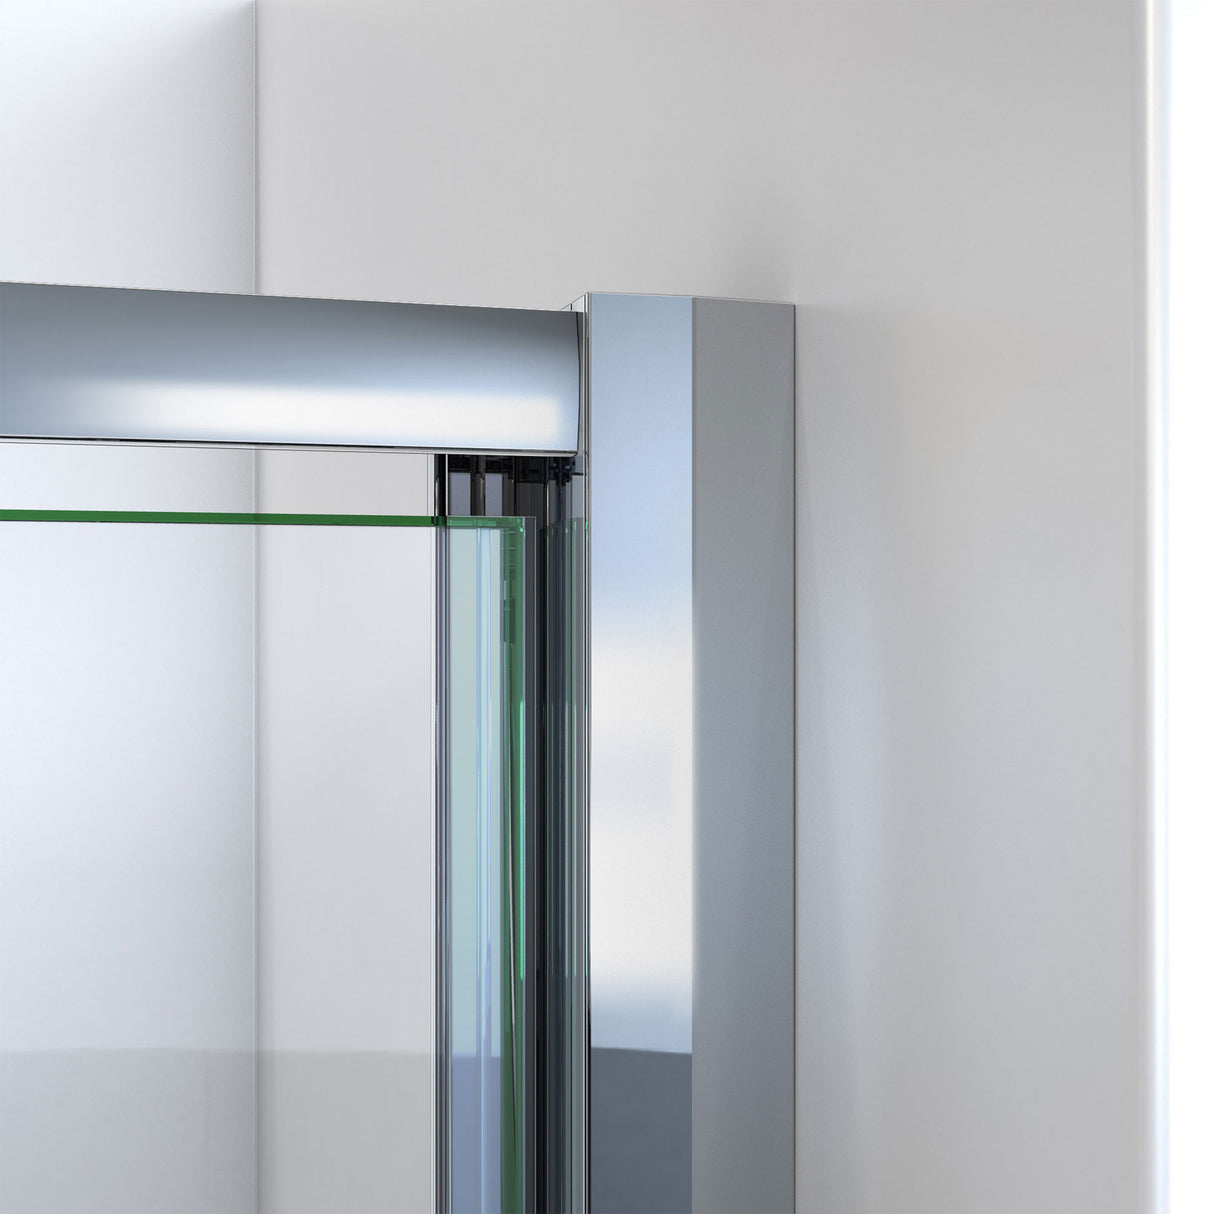 DreamLine Flex 36 in. D x 36 in. W x 78 3/4 in. H Pivot Shower Door, Base, and White Wall Kit in Chrome